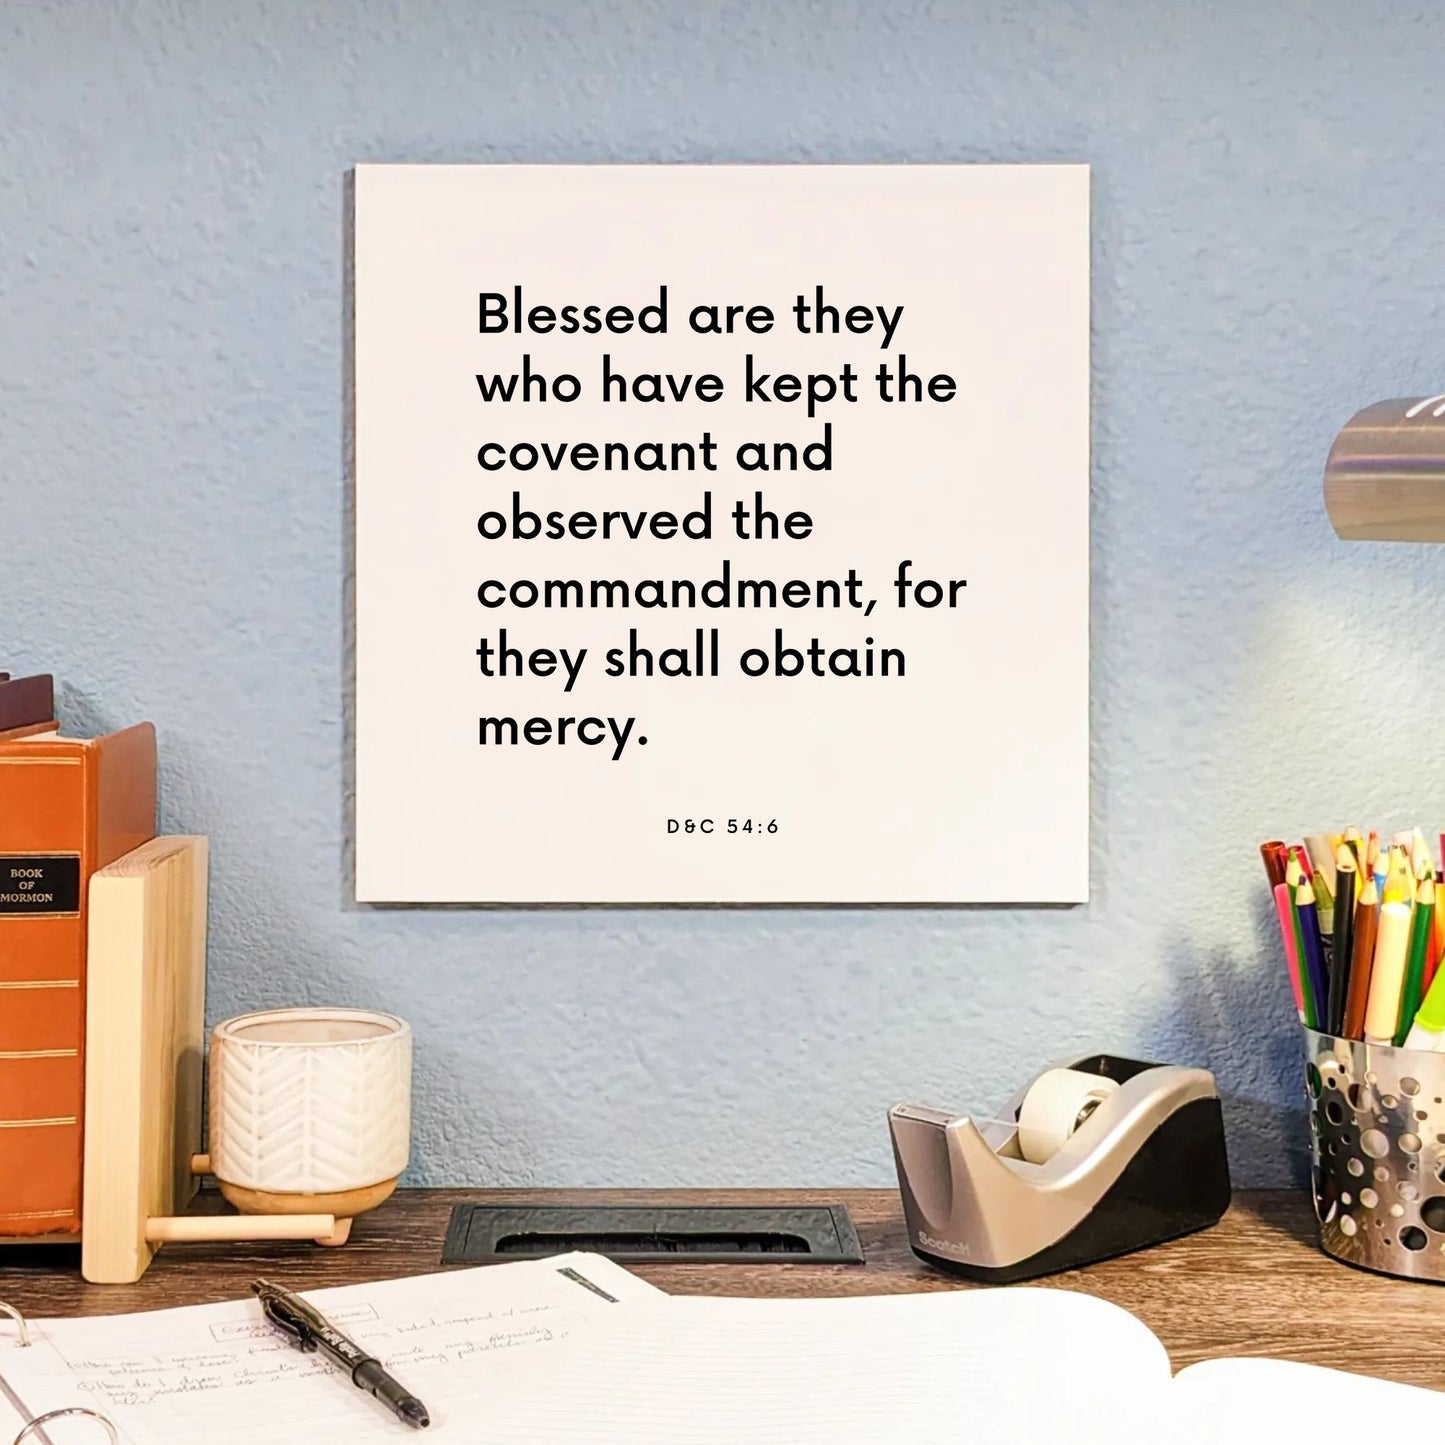 Desk mouting of the scripture tile for D&C 54:6 - "Blessed are they who have kept the covenant"